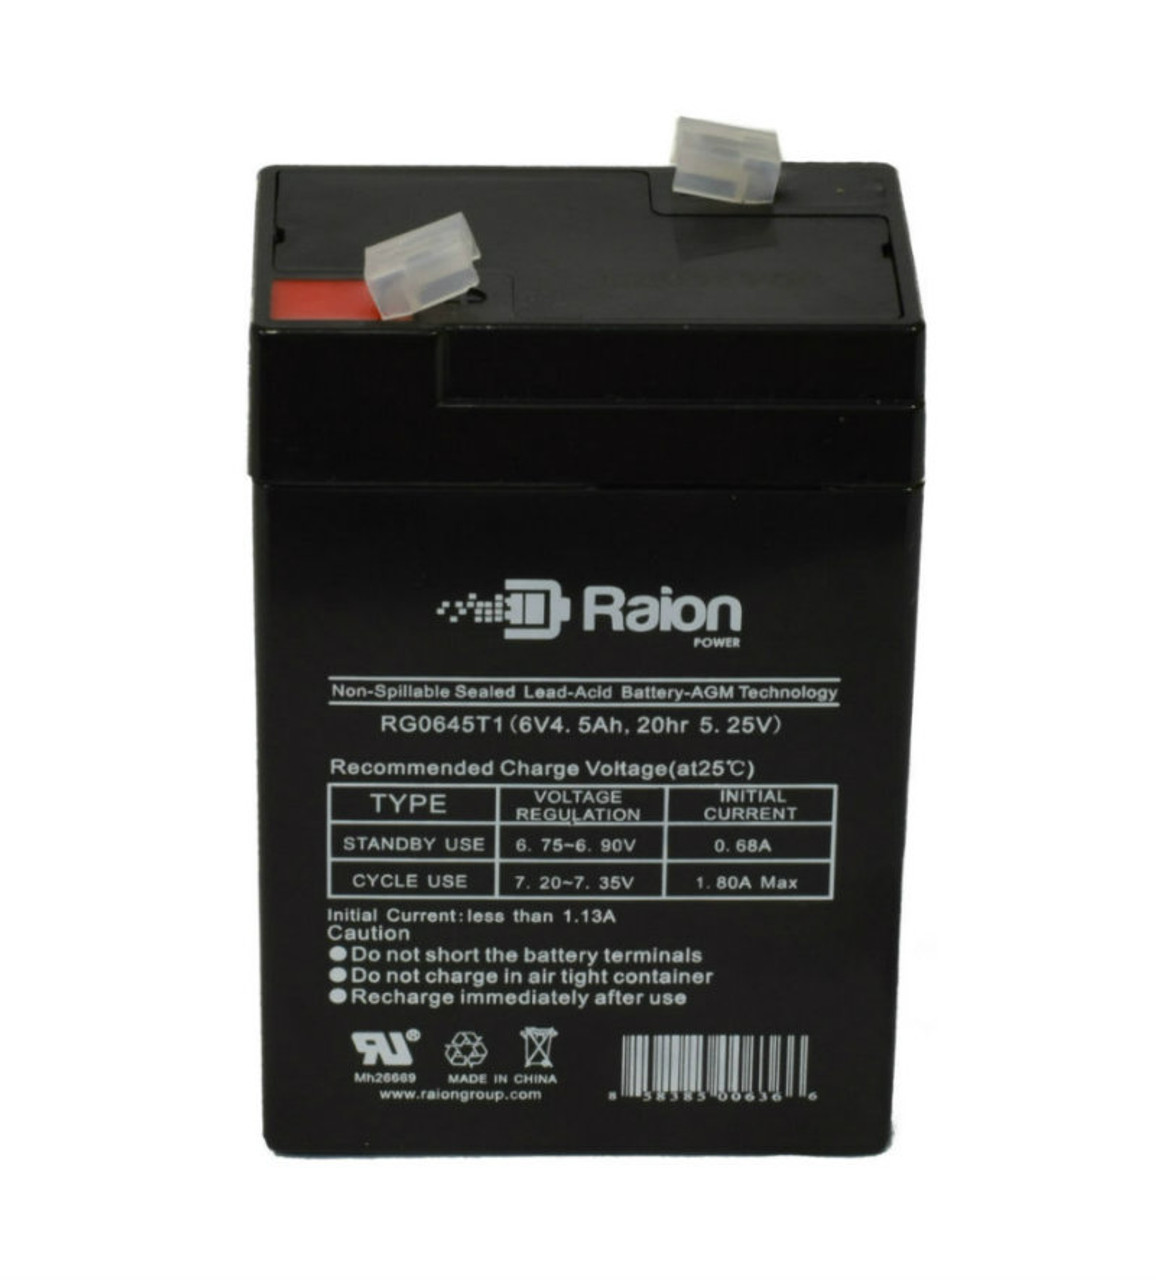 Raion Power RG0645T1 Replacement Battery Cartridge for FirstPower FP650